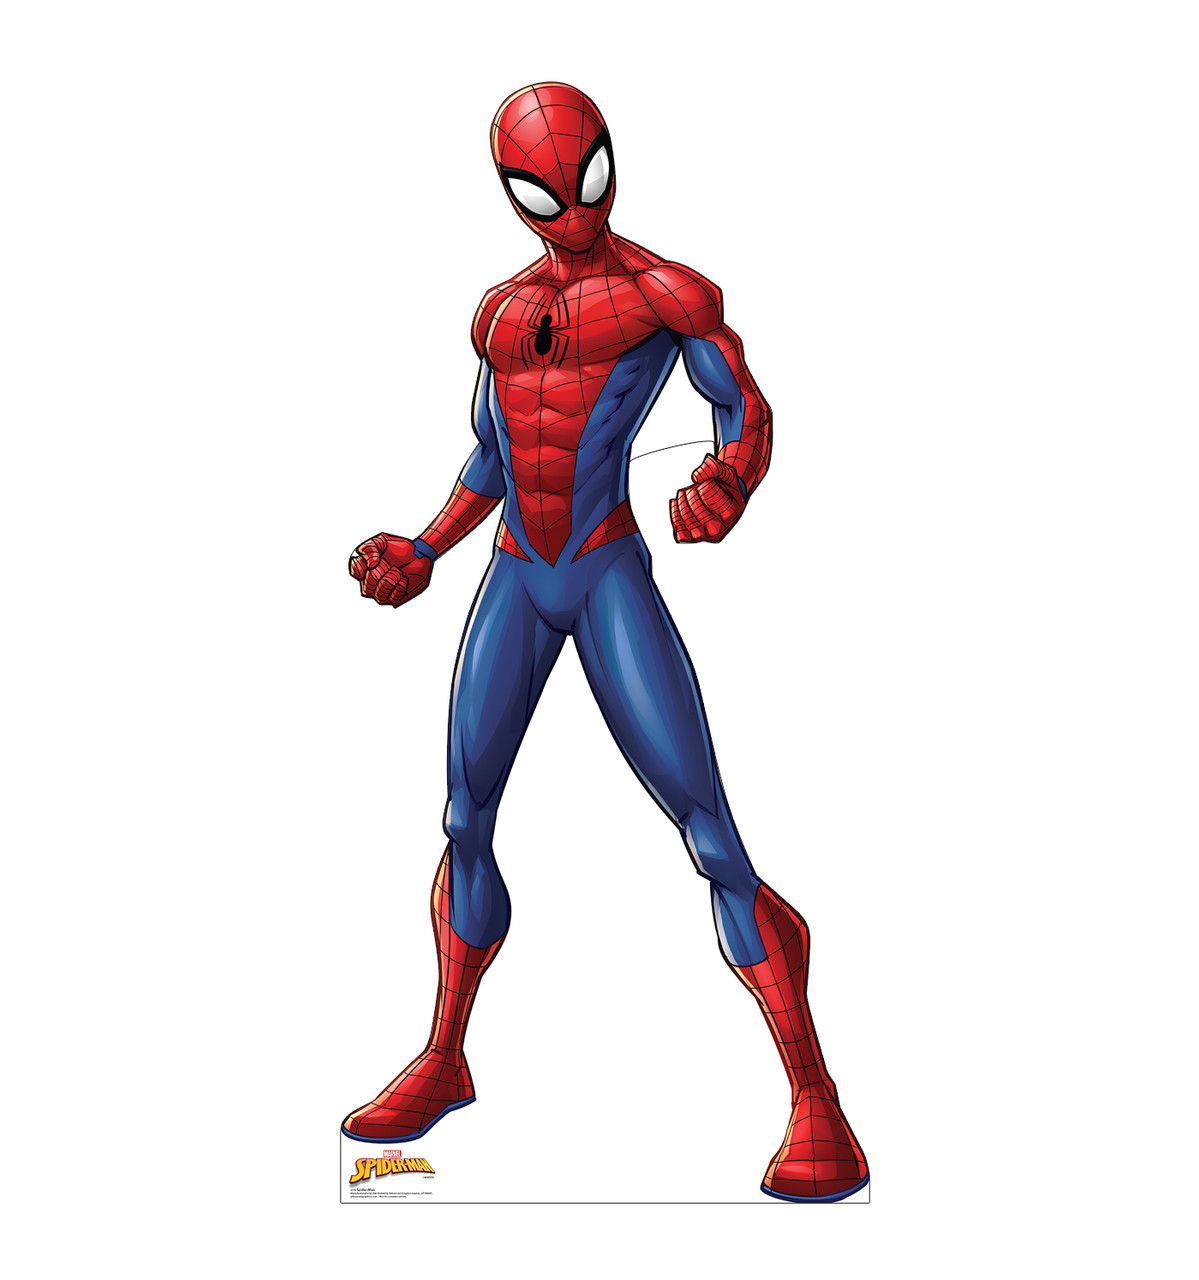 Life-size cardboard standee of Spider-Man from Marvel.